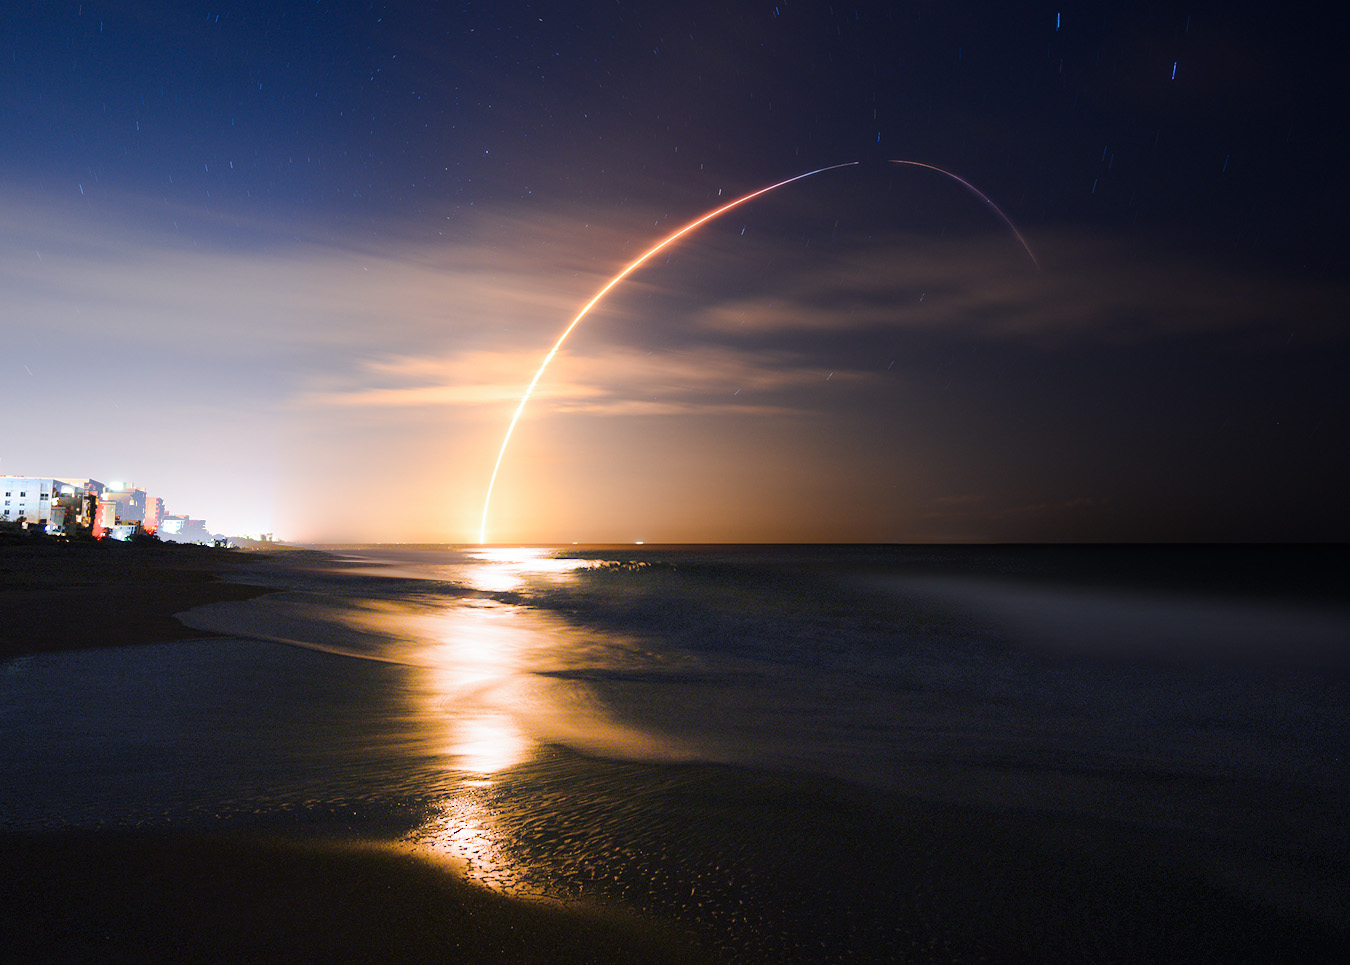 space shuttle night launch photography